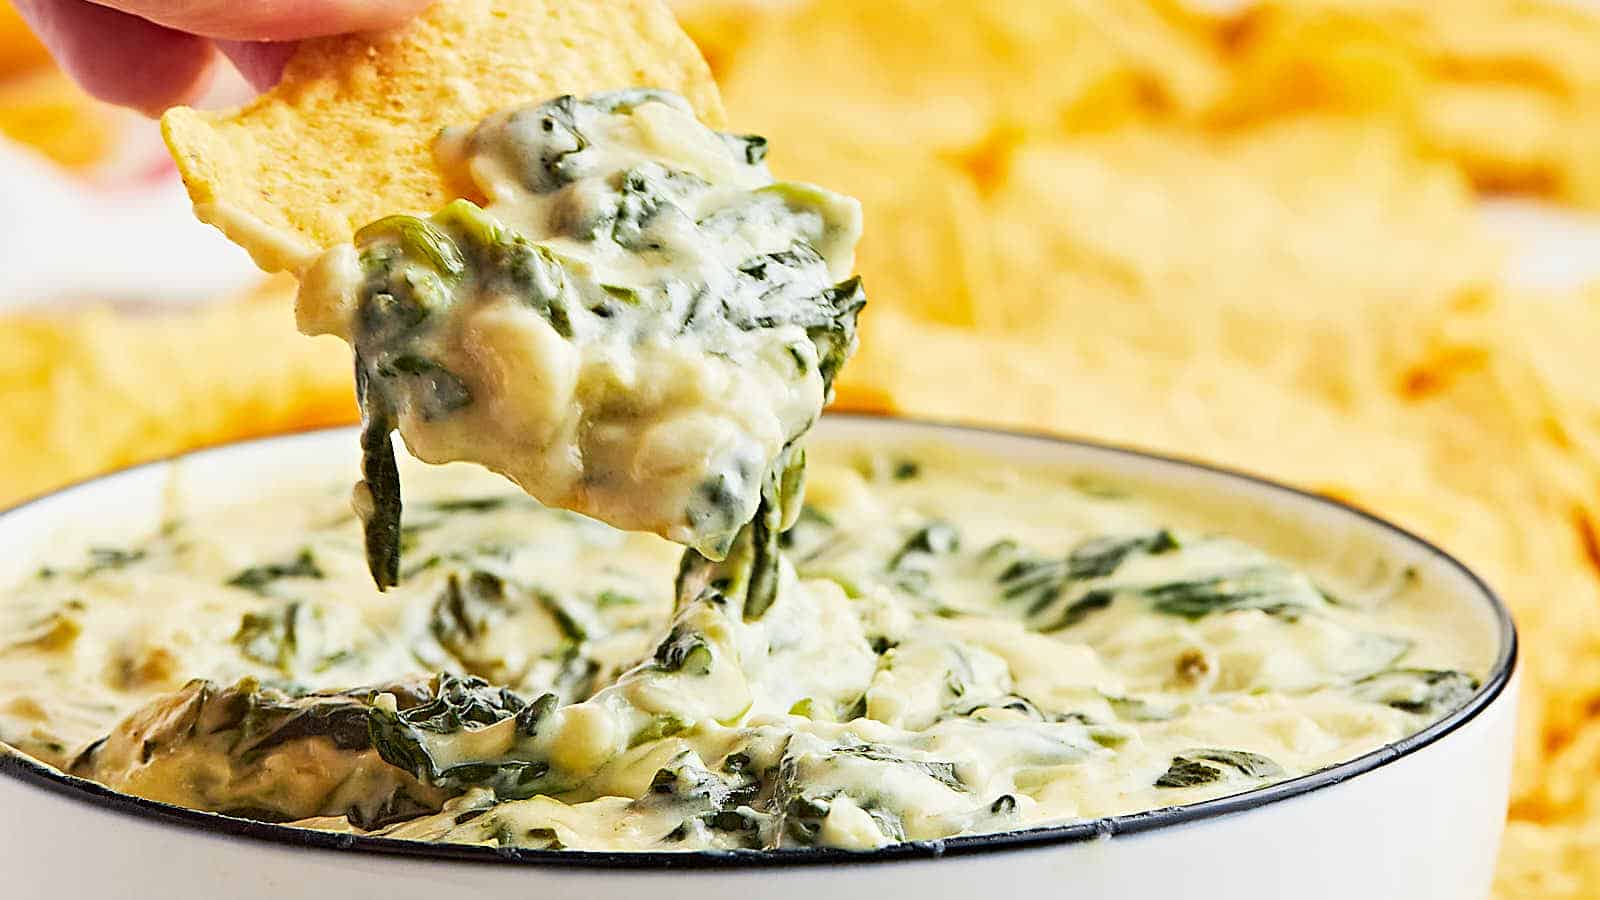 Warm Spinach Dip recipe by Cheerful Cook. 